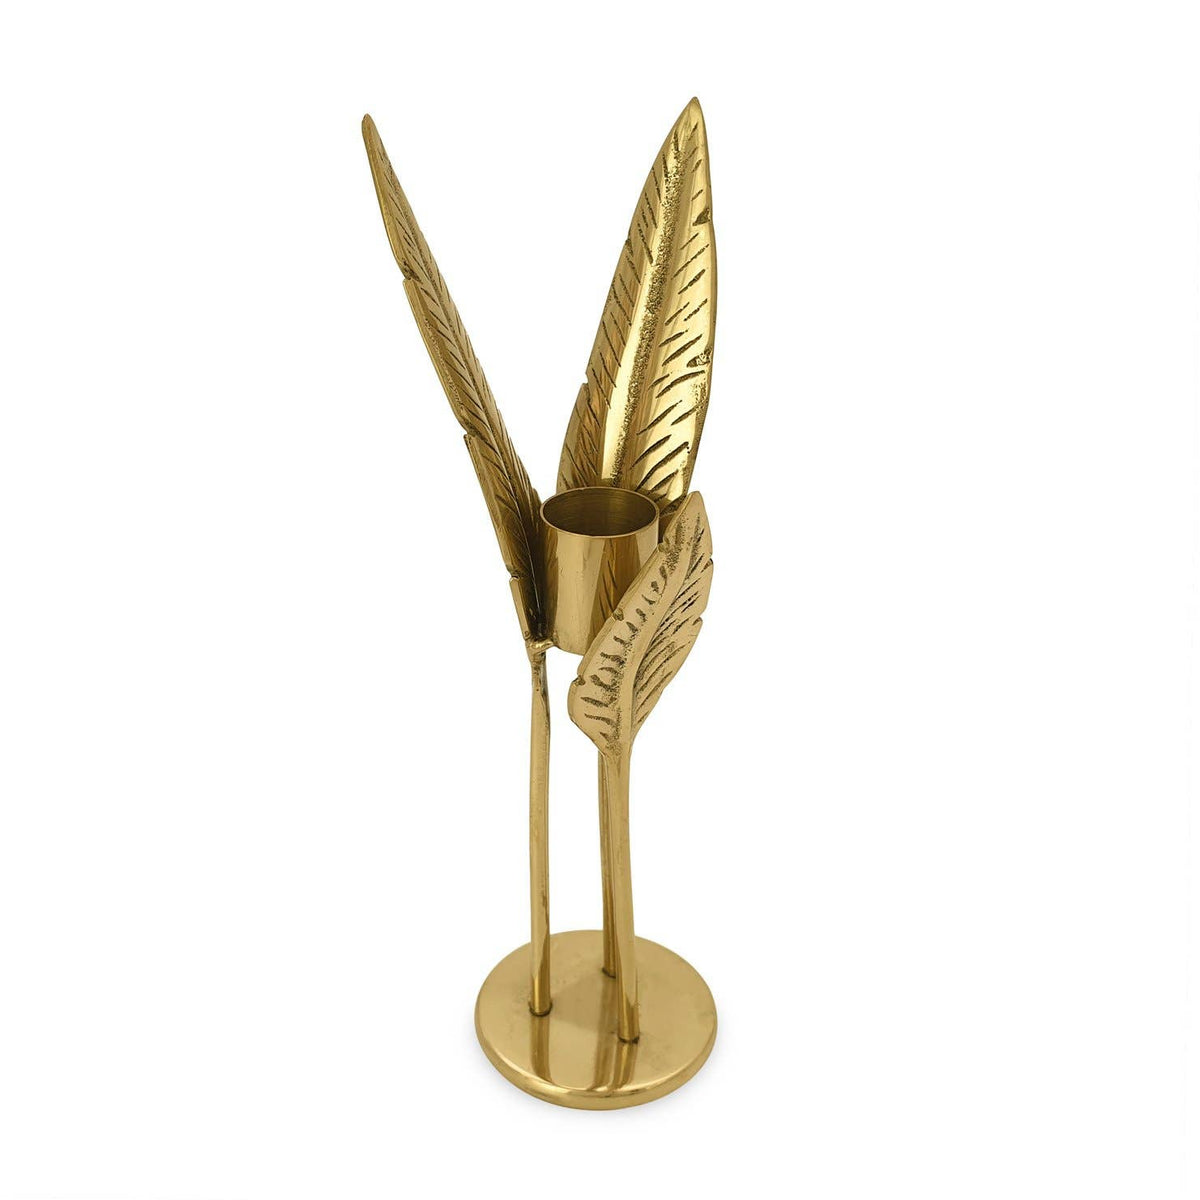 Brass banana leaf taper candle holder. Intricate detail and lightweight.